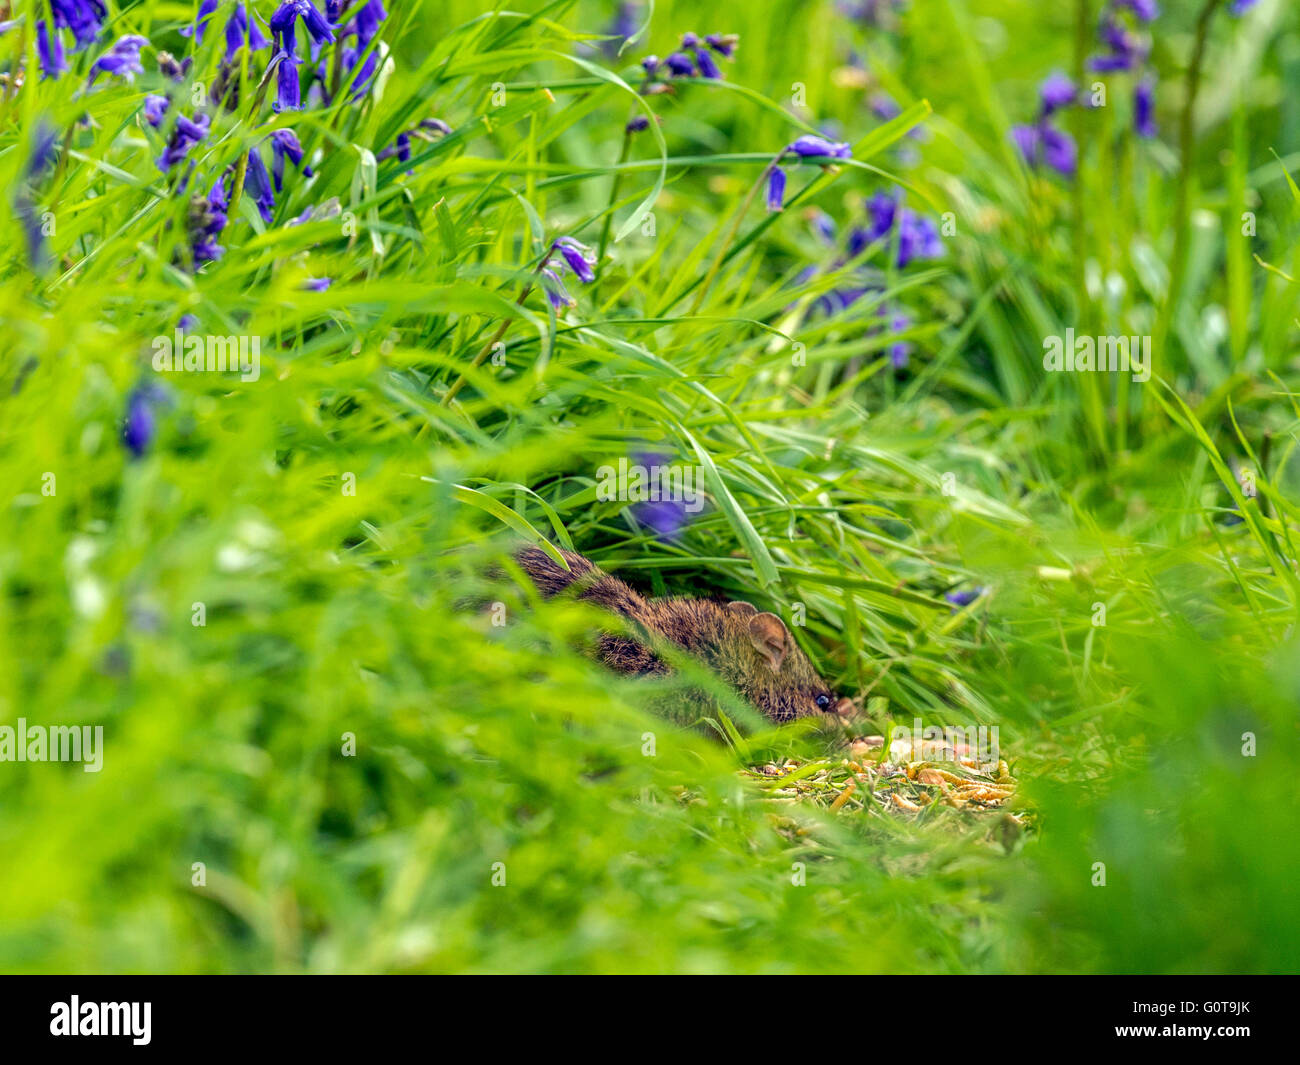 Shy wood mouse or murid rodent (Apodemus sylvaticus) foraging amongst BlueBells in long green grass in woodland setting. Stock Photo